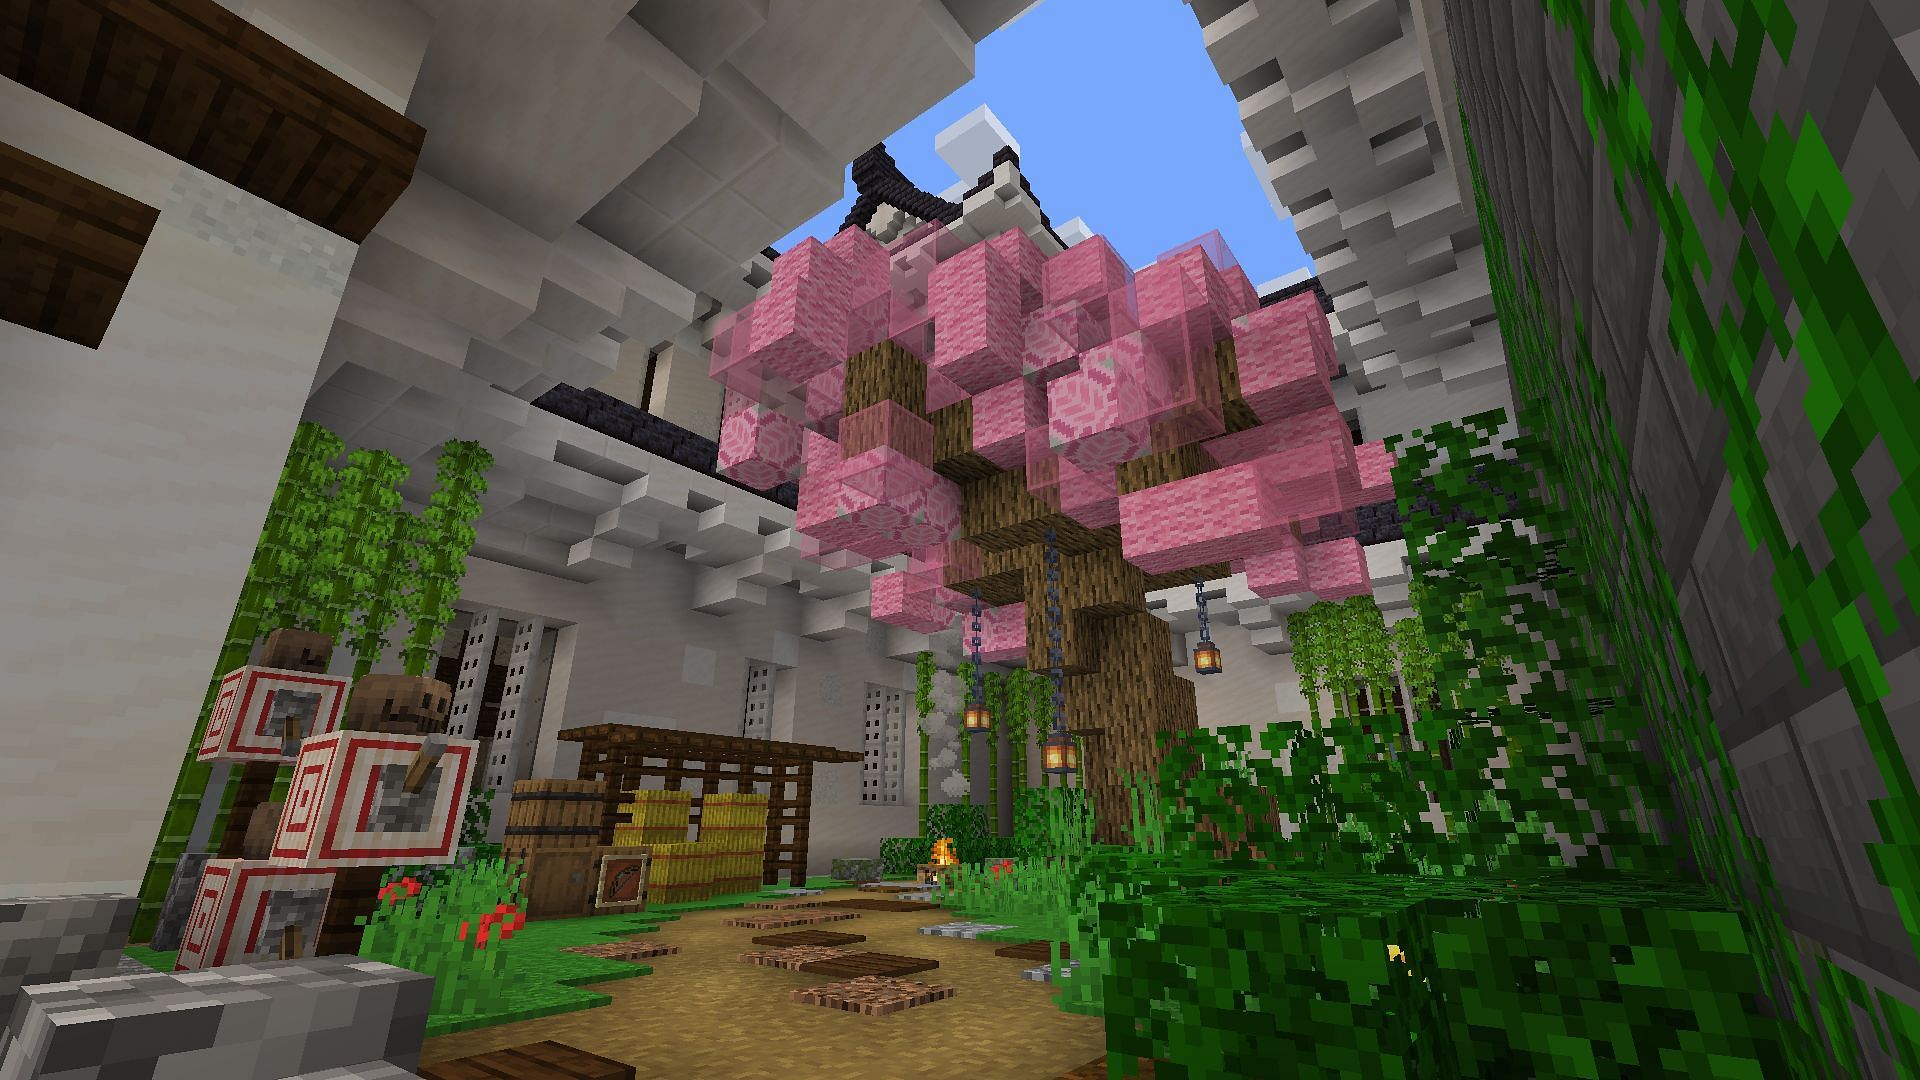 Himeji castle as seen from the inside (Image via Minecraft)